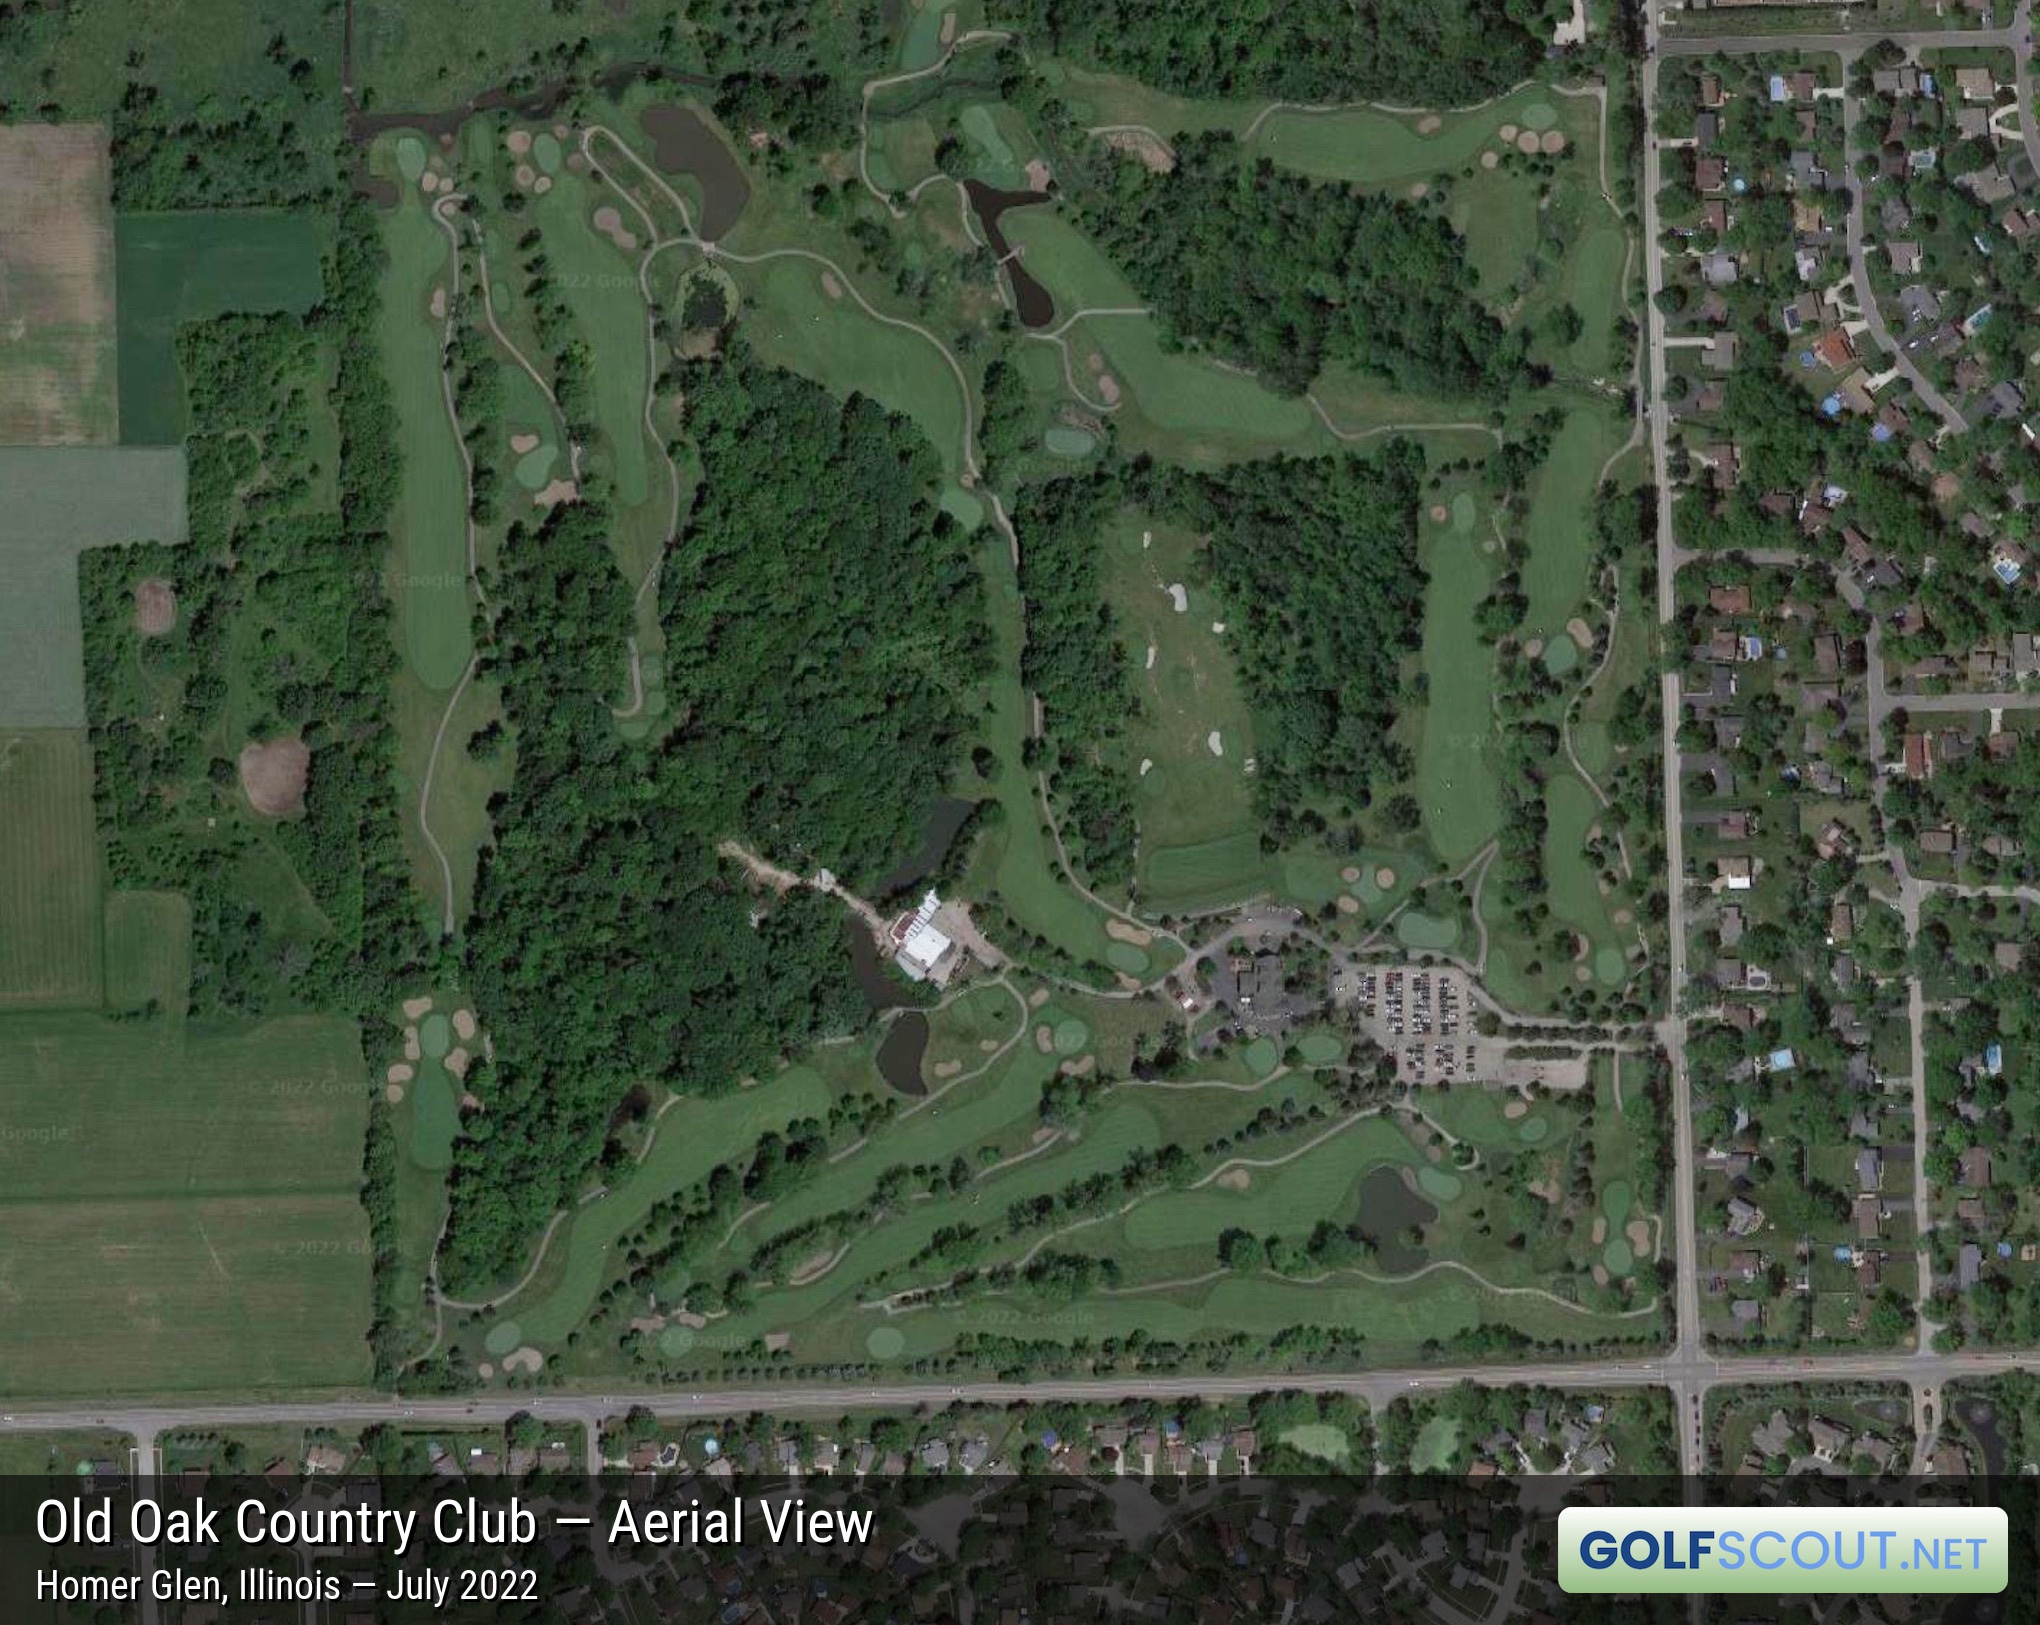 Aerial satellite imagery of Old Oak Country Club in Homer Glen, Illinois. 